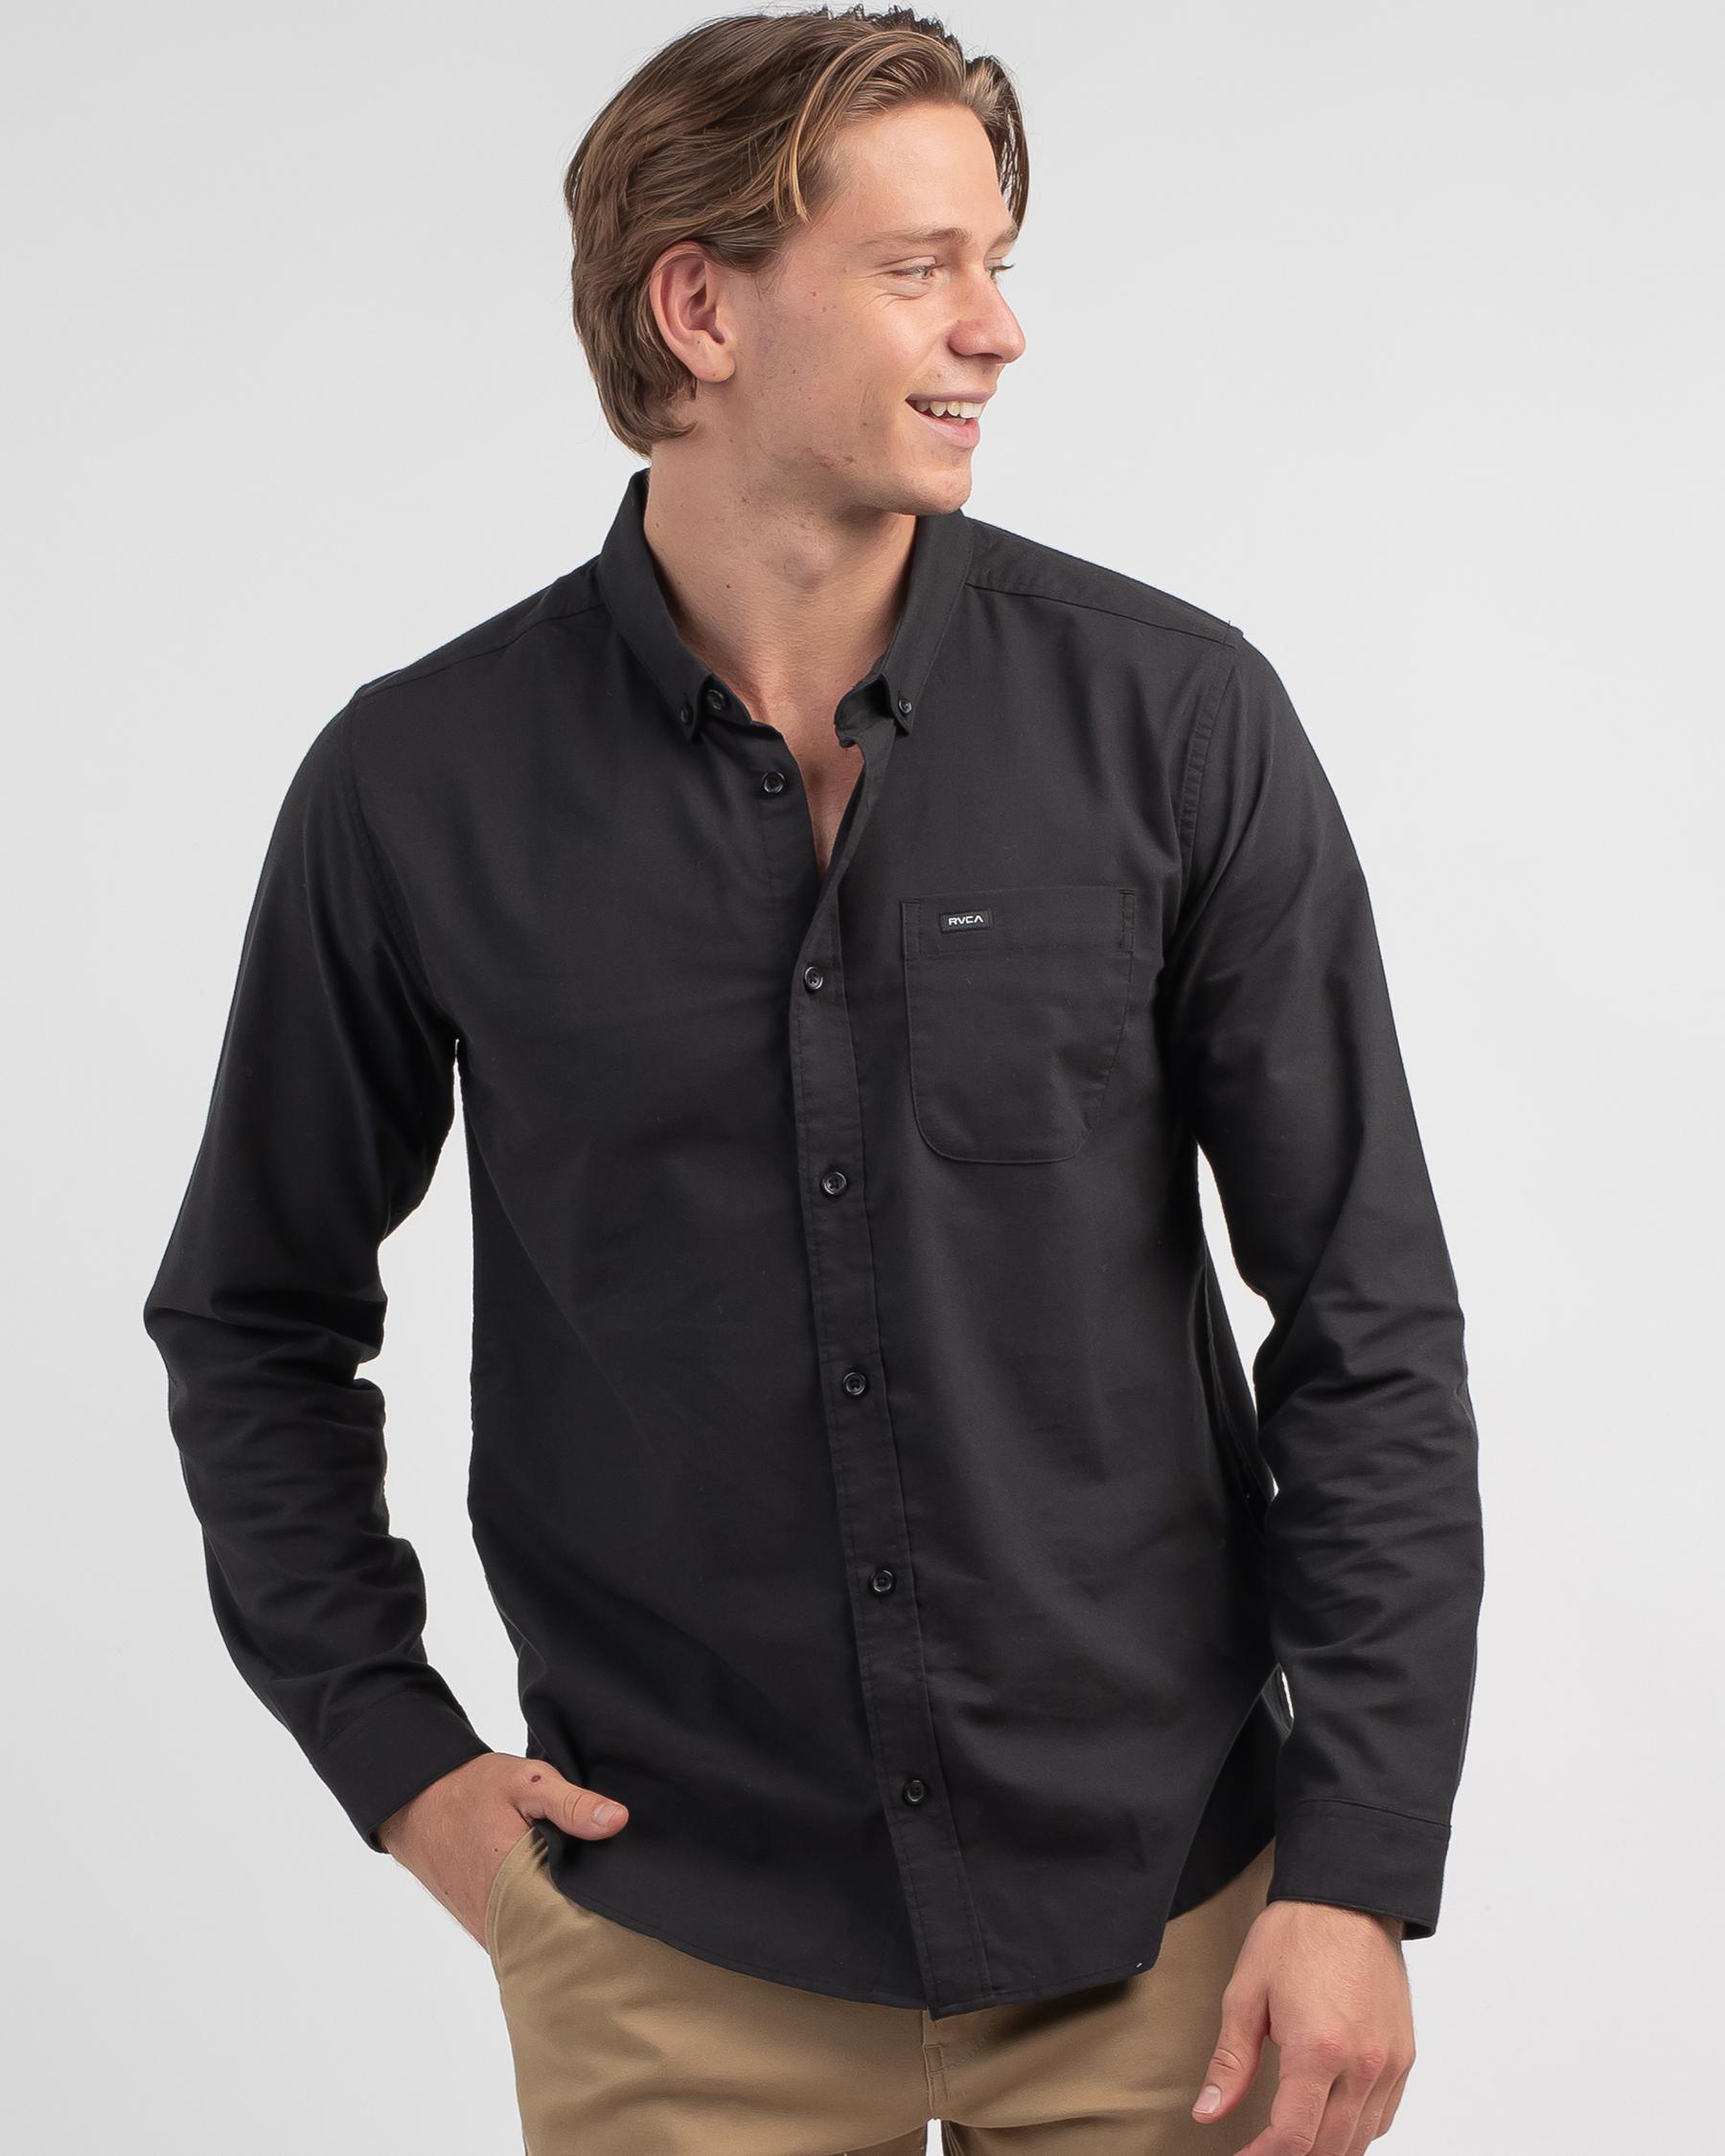 RVCA That'll Do Stretch Long Sleeve Shirt In Black - Fast Shipping ...